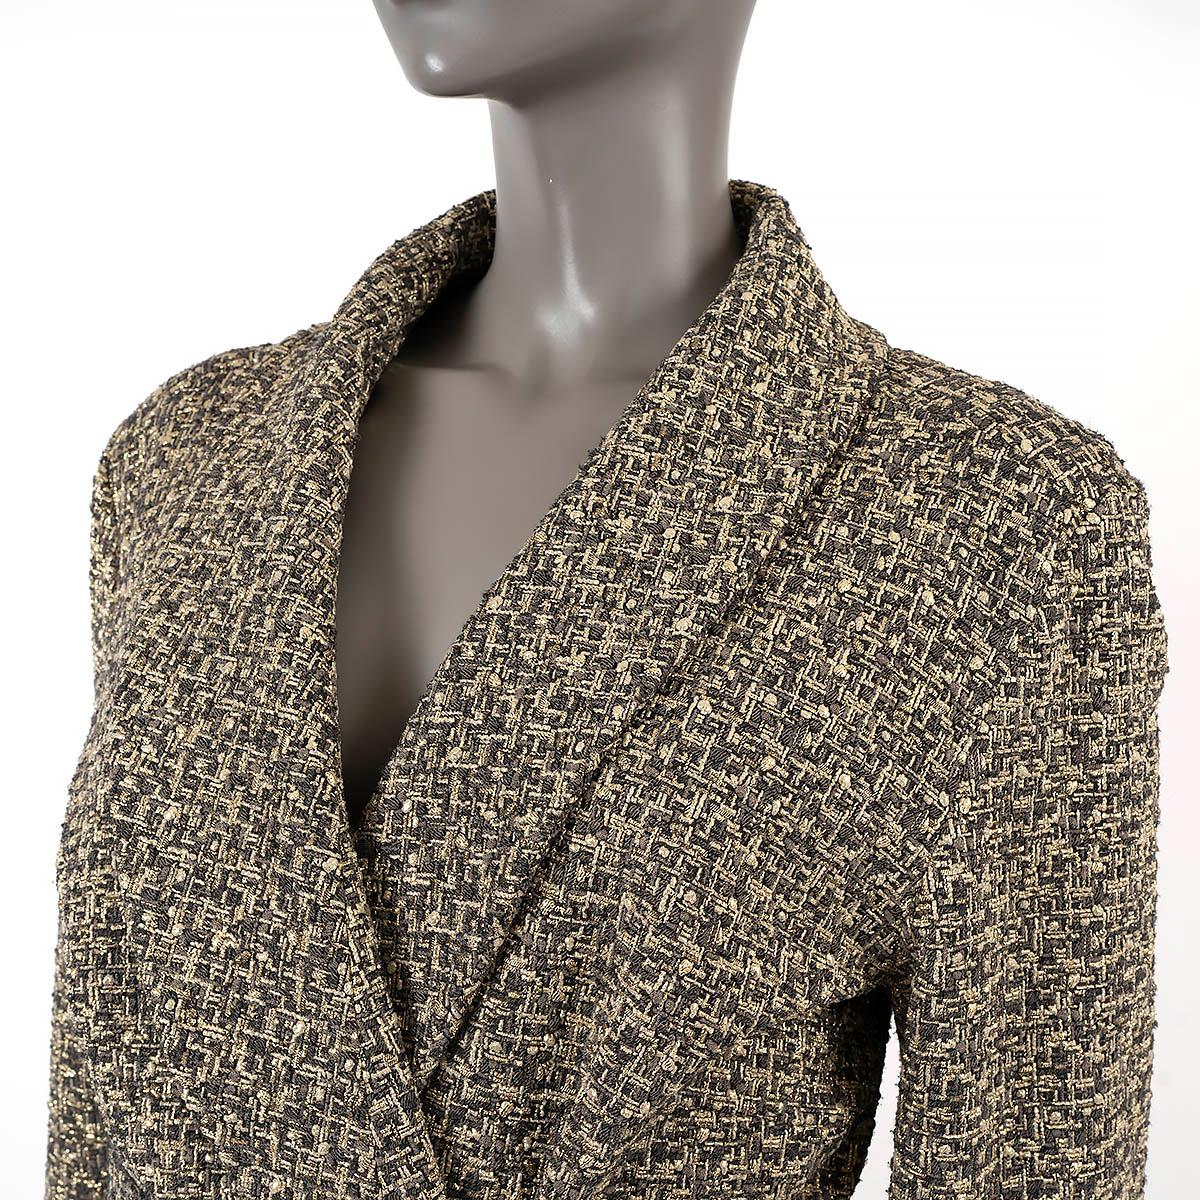 CHANEL gold 2016 16A ROME LUREX TWEED BELTED Coat Jacket 44 fits M For Sale 3